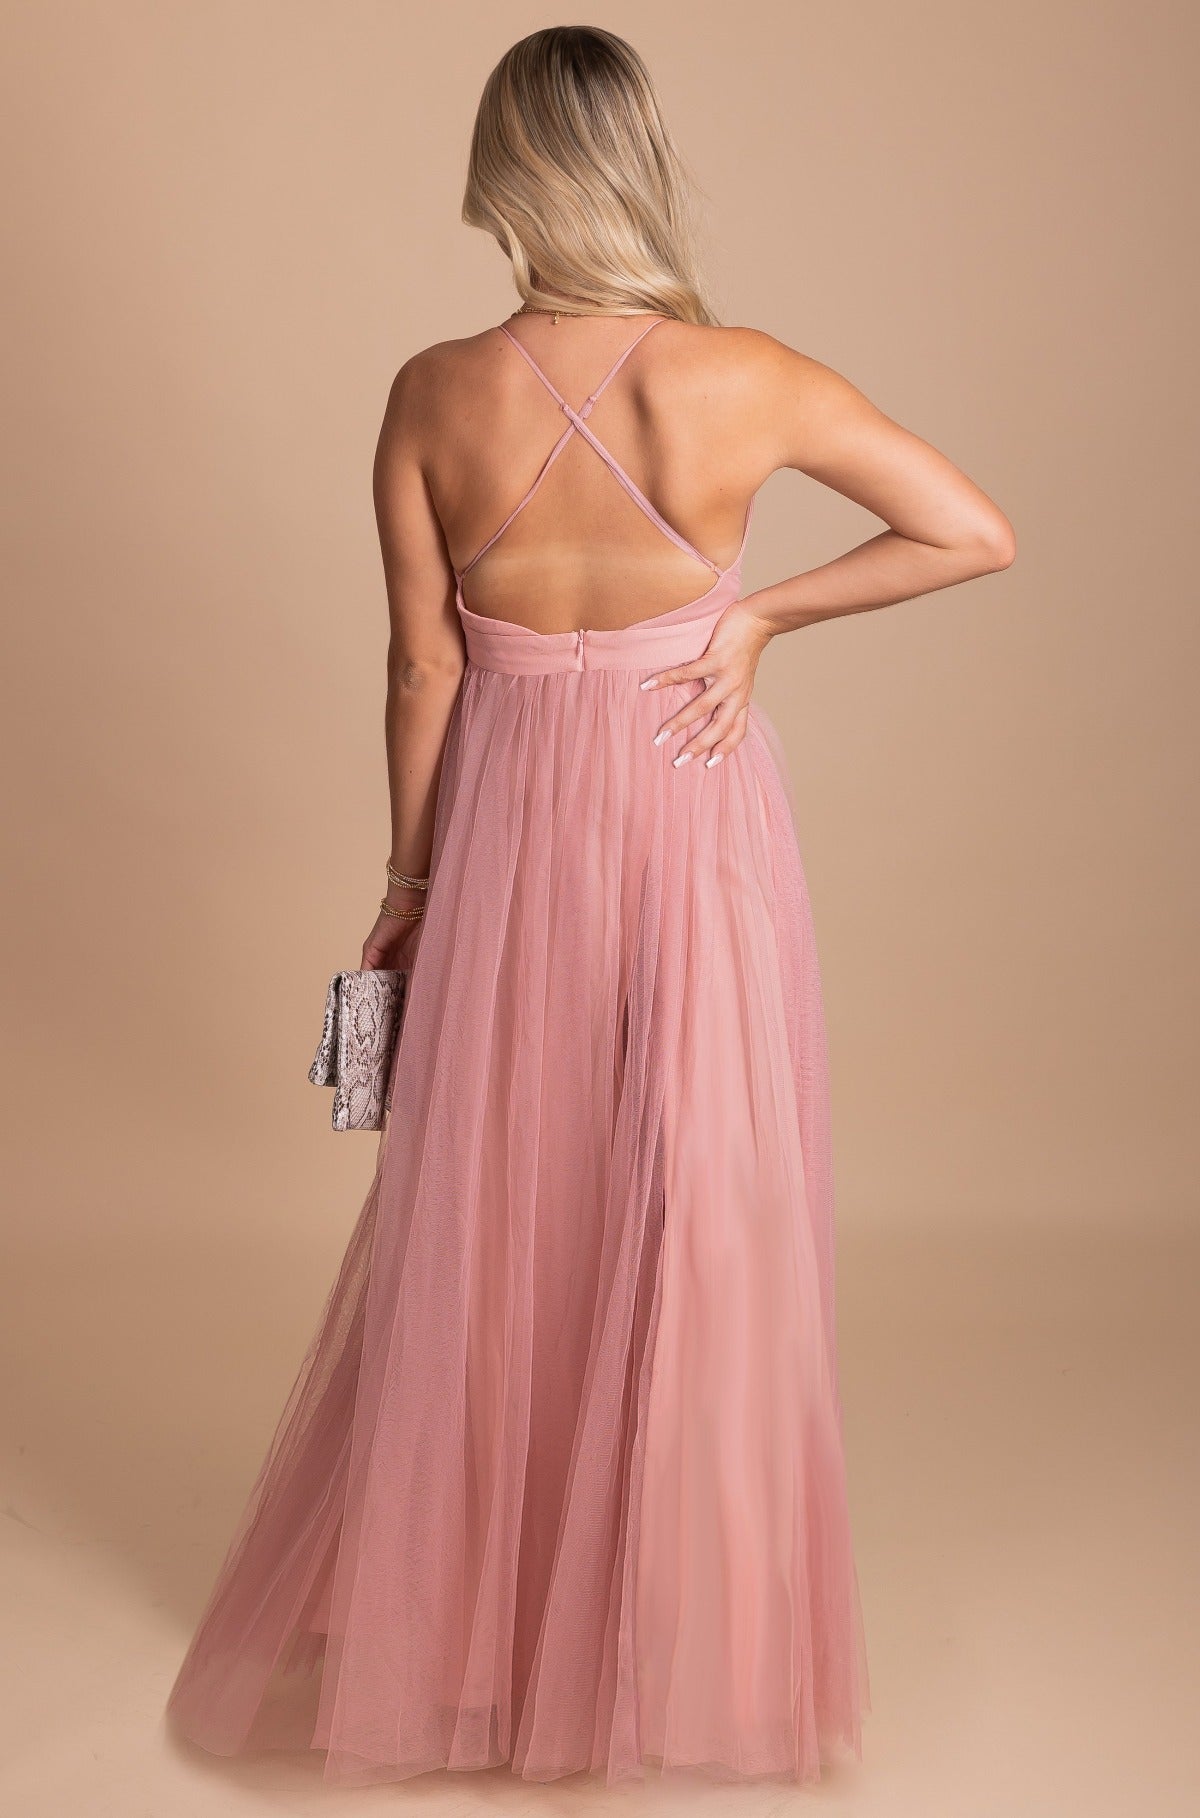 Formal Floor Length Dress in Mauve Pink with Spaghetti Straps